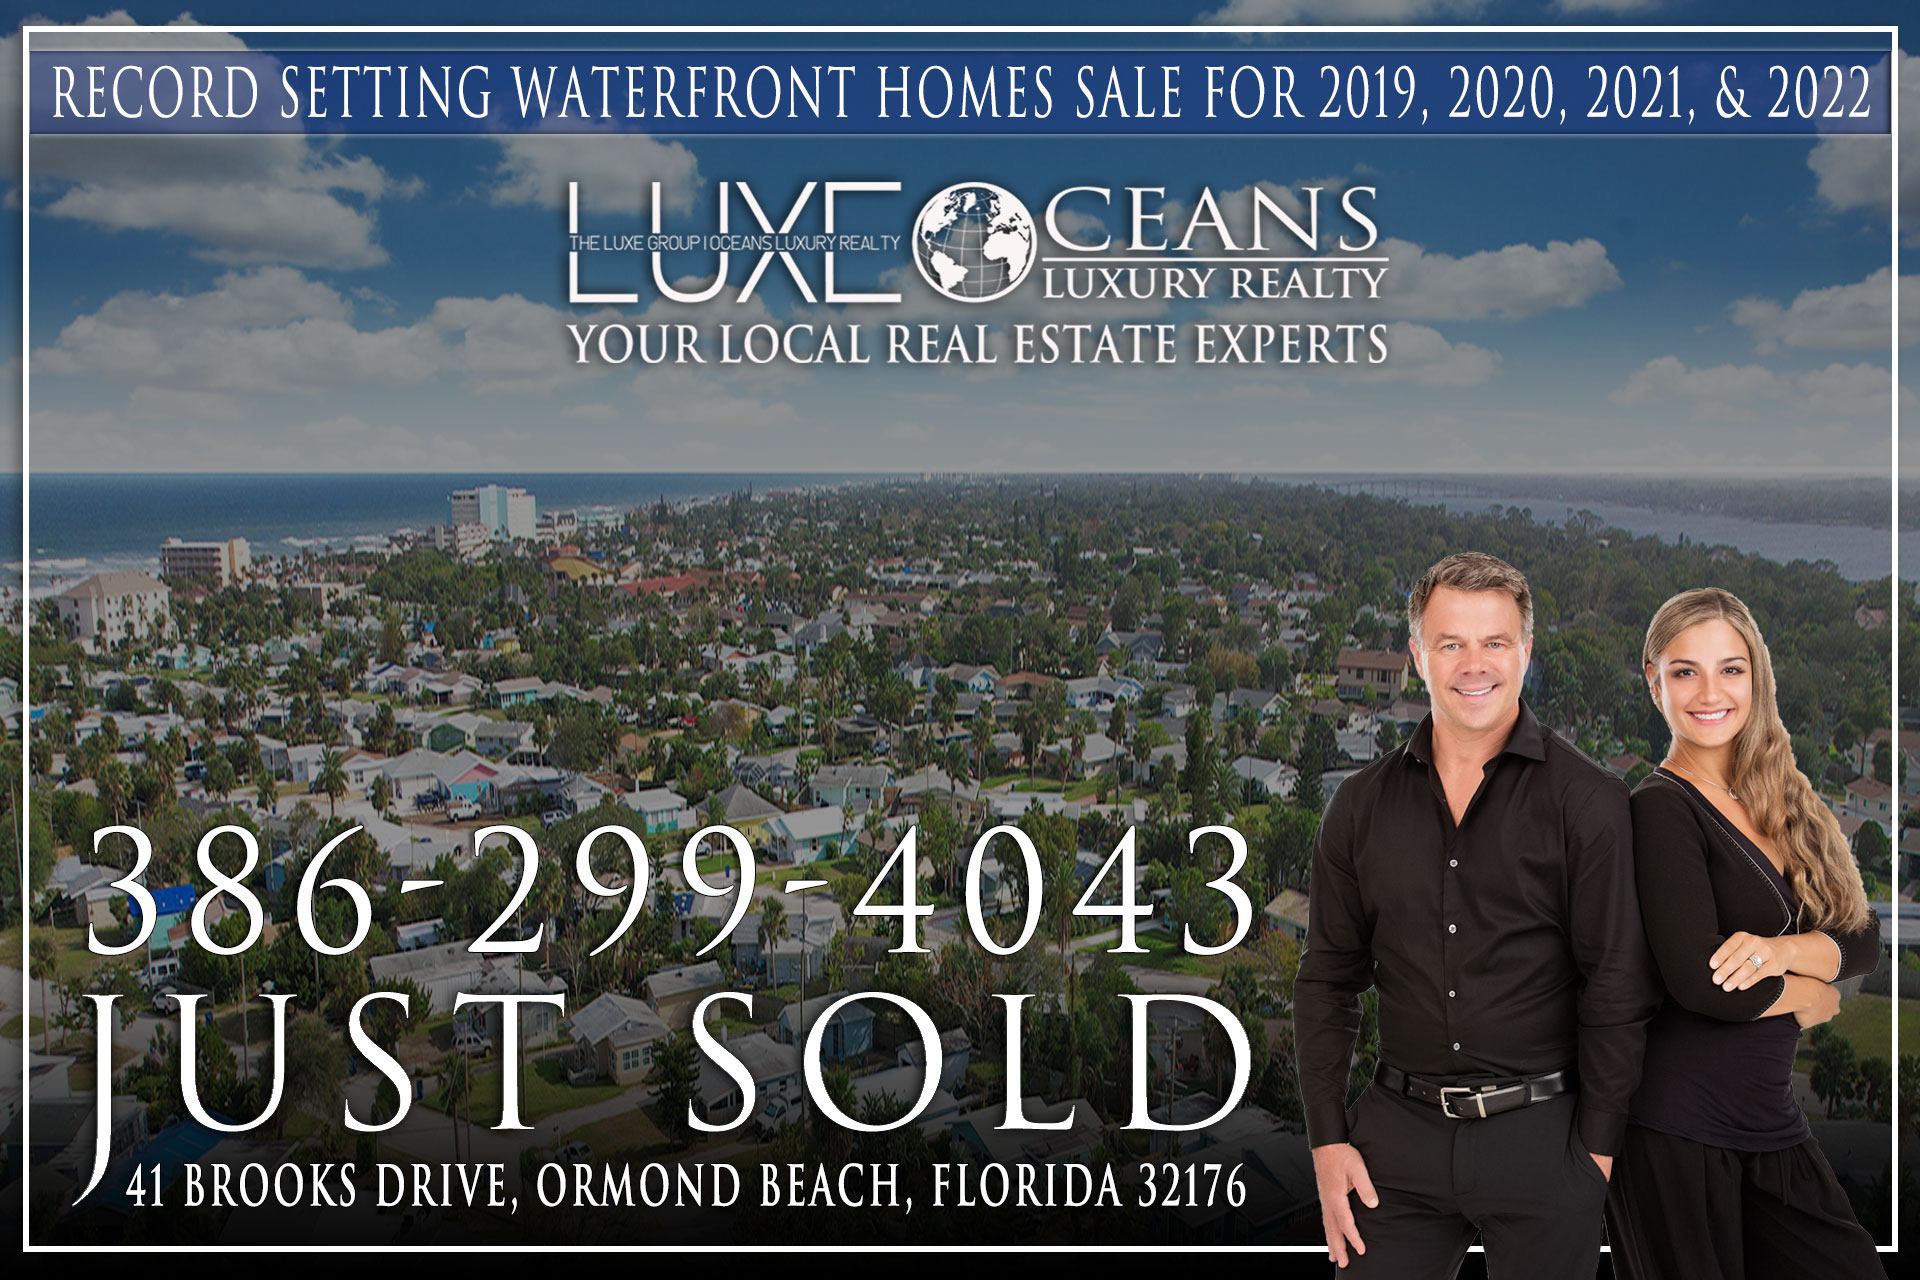 41 Brooks Drive Ormond Beach Home is now sold. Luxury real estate for sale in Daytona Beach, FL. The LUXE Group at Oceans Luxury Realty 386-299-4043